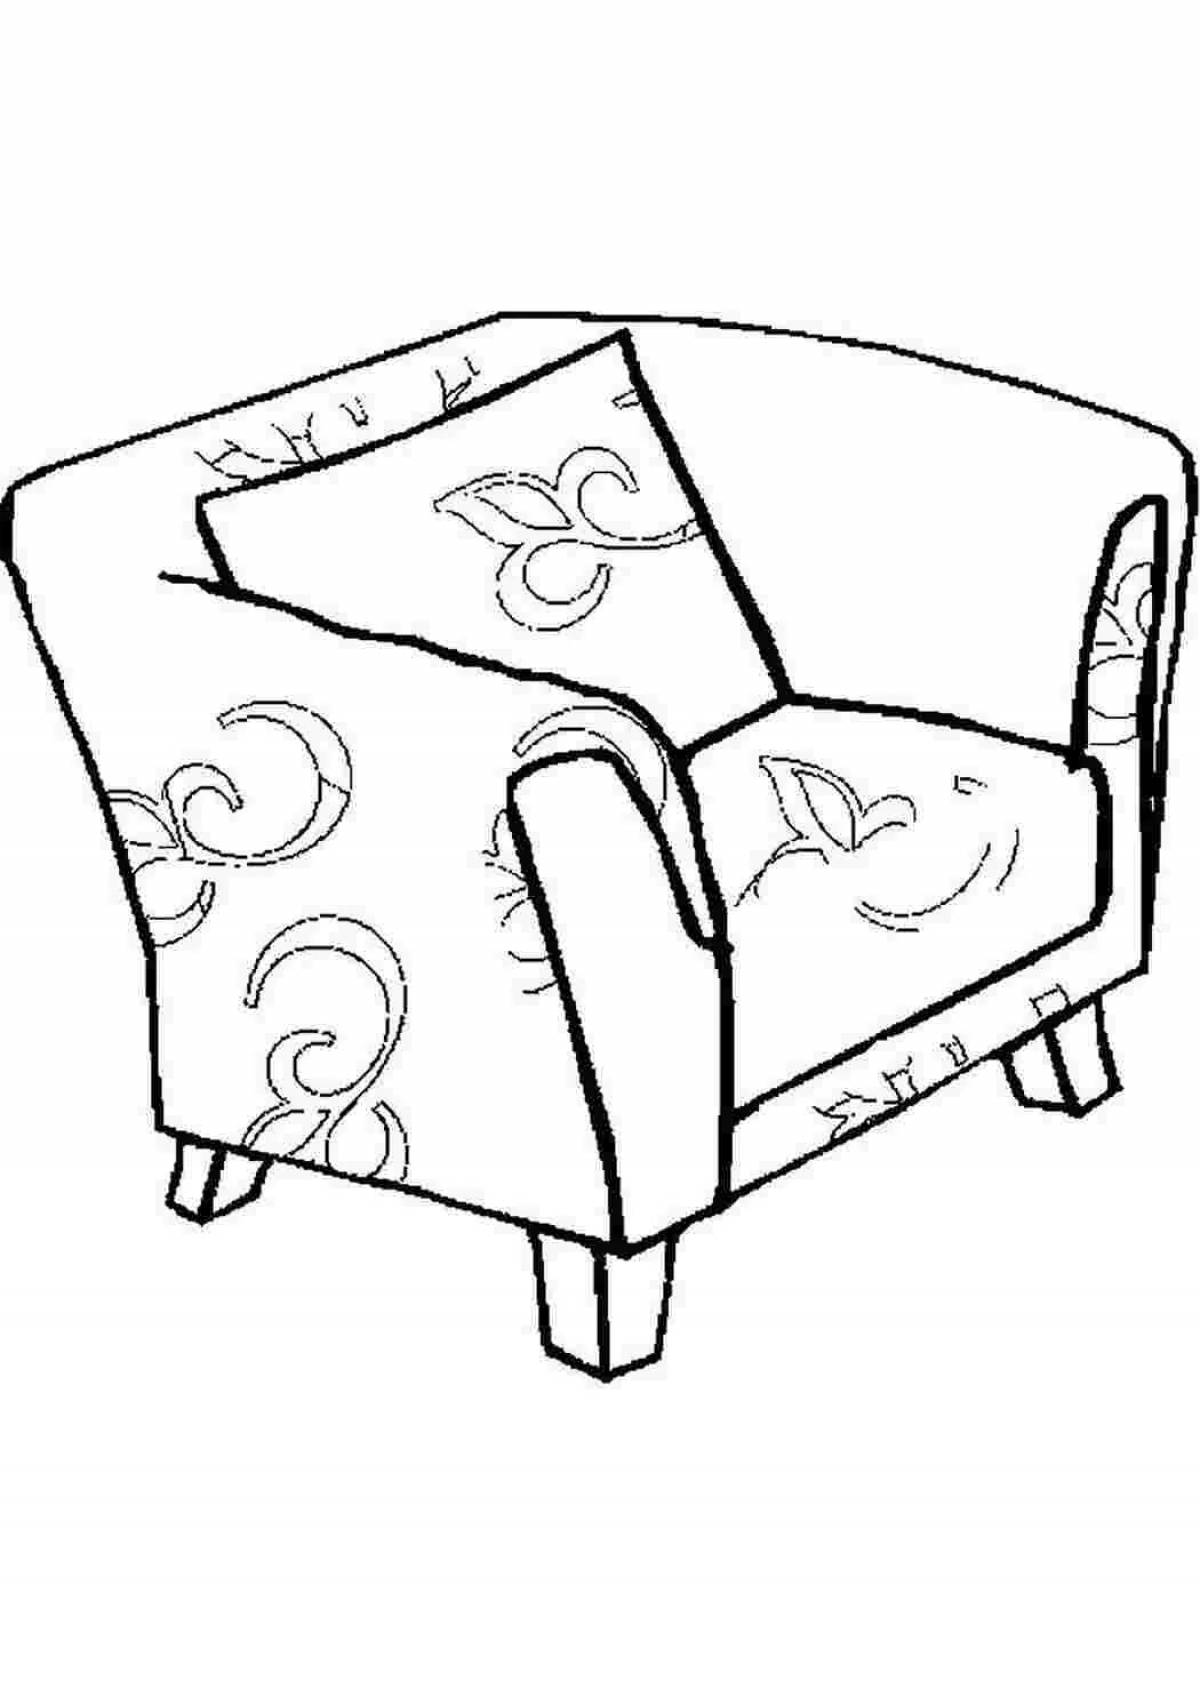 Attractive chair coloring for 4-5 year olds